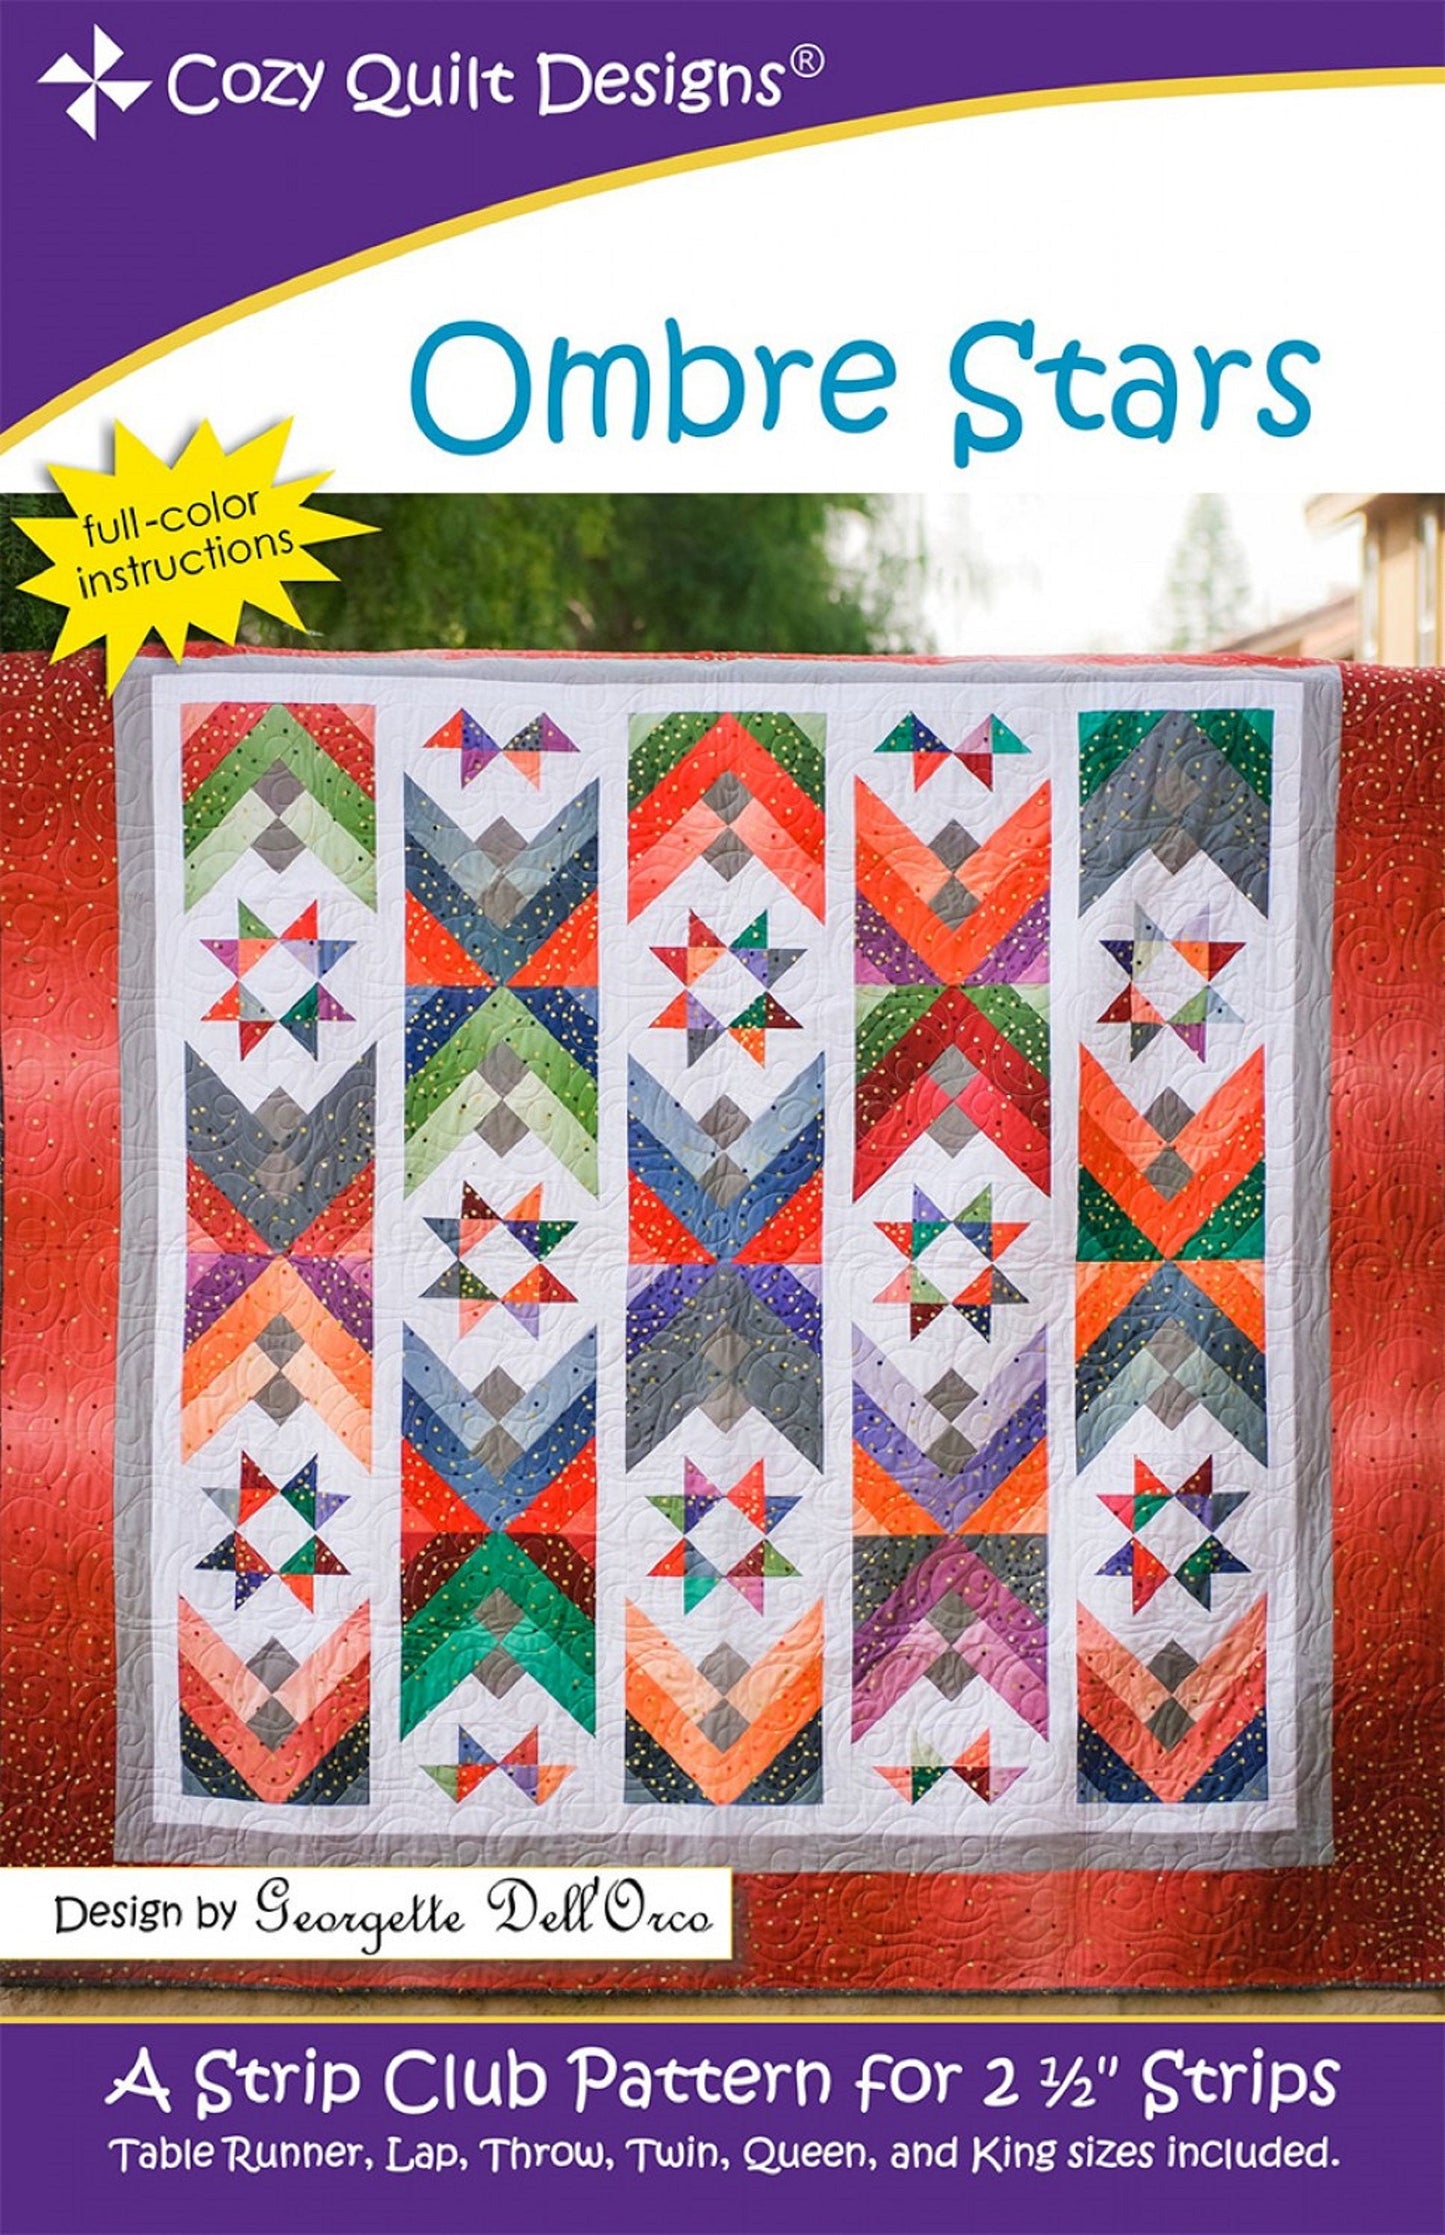 Ombre Stars Quilt Pattern by Cozy Quilt Designs